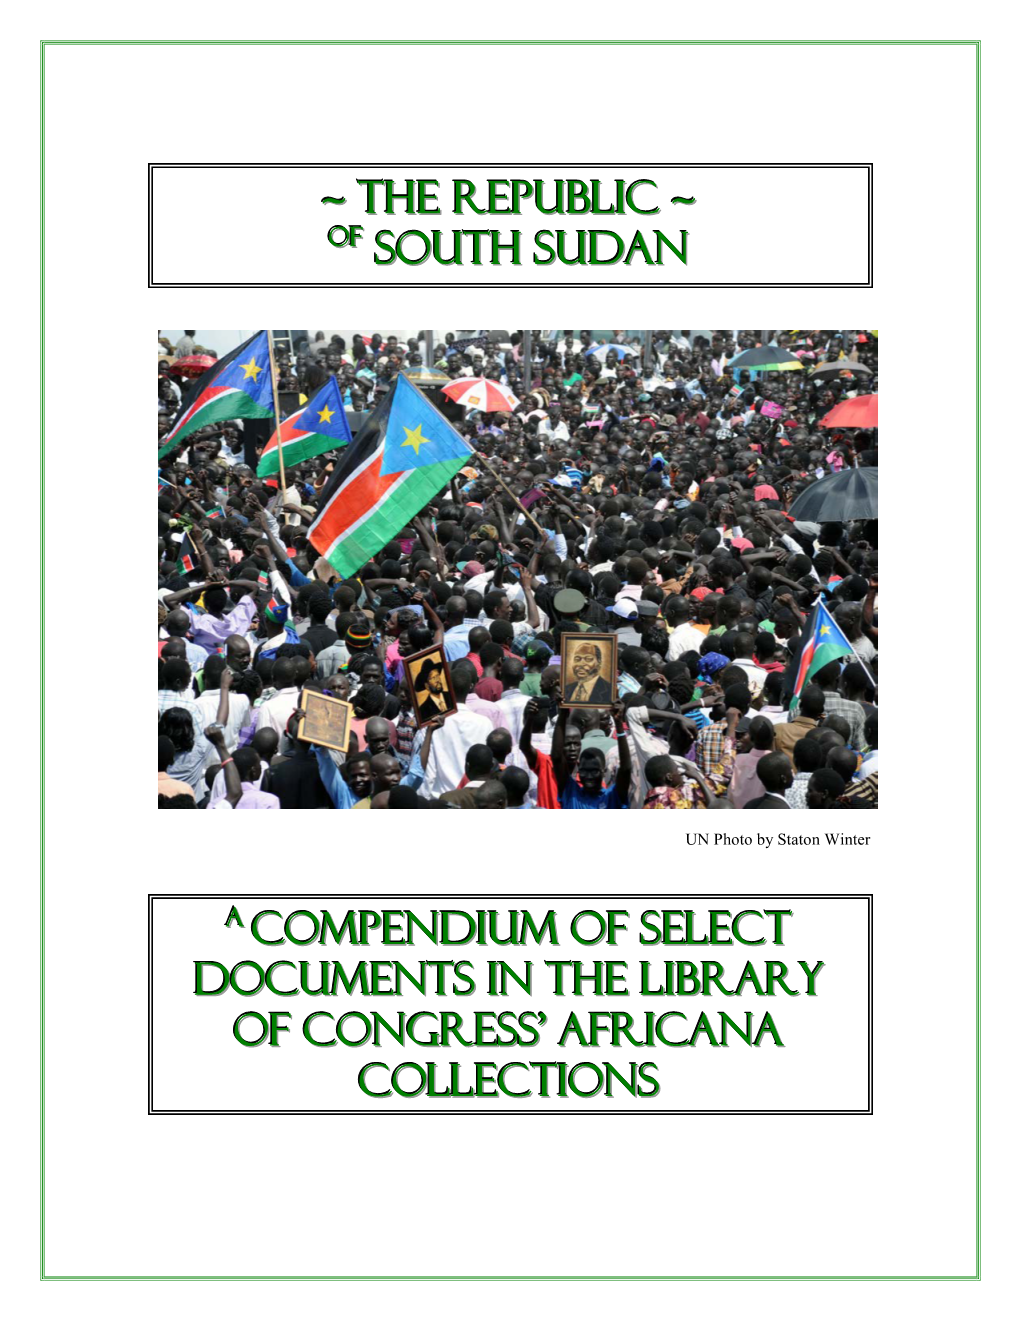 An Annotated Bibliography of South Sudan